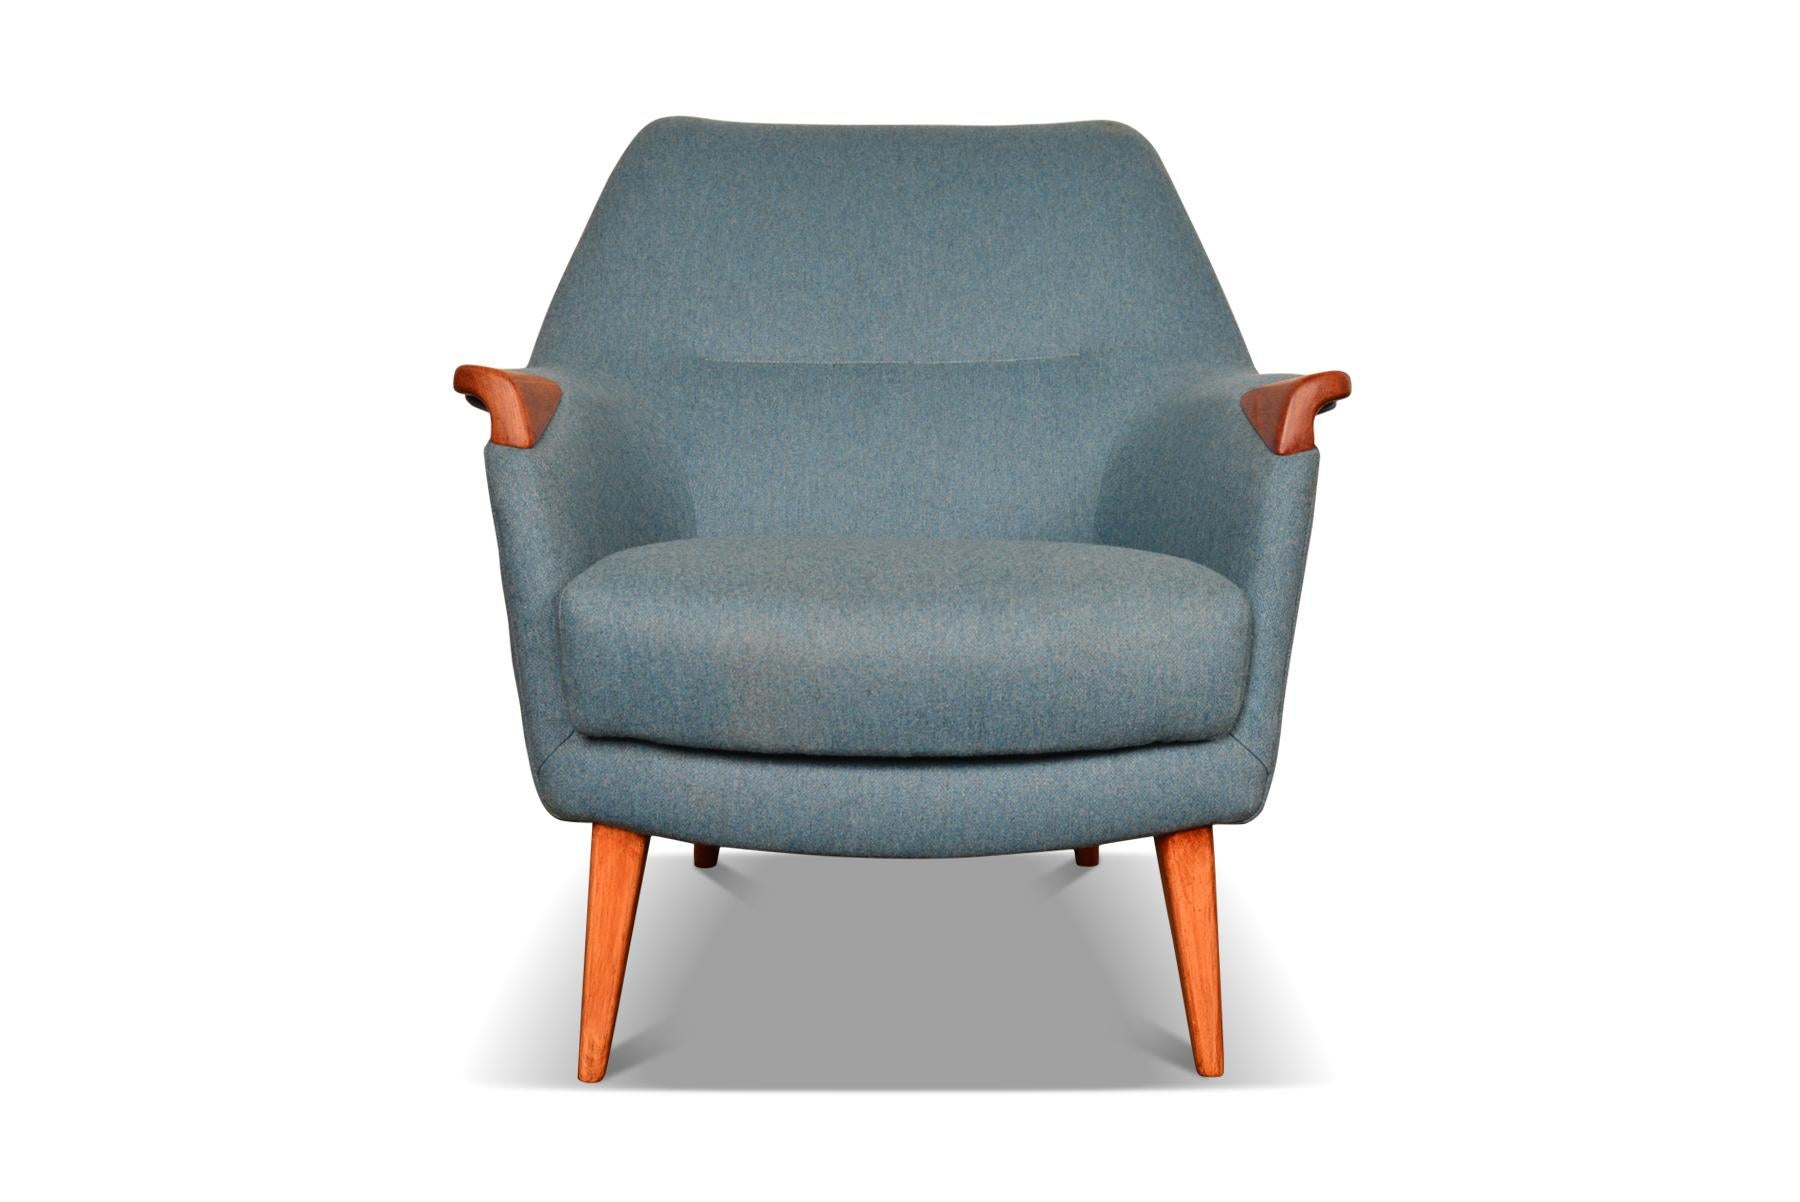 Origin: Sweden
Designer: Unknown
Manufacturer: Unknown
Era: 1960s
Materials: Stained beech, Wool
Measurements: 29″ wide x 29″ deep x 32.5″ tall
Seat: 15.5″ deep

Condition: Newly upholstered in teal Italian felted wool.  In excellent condition